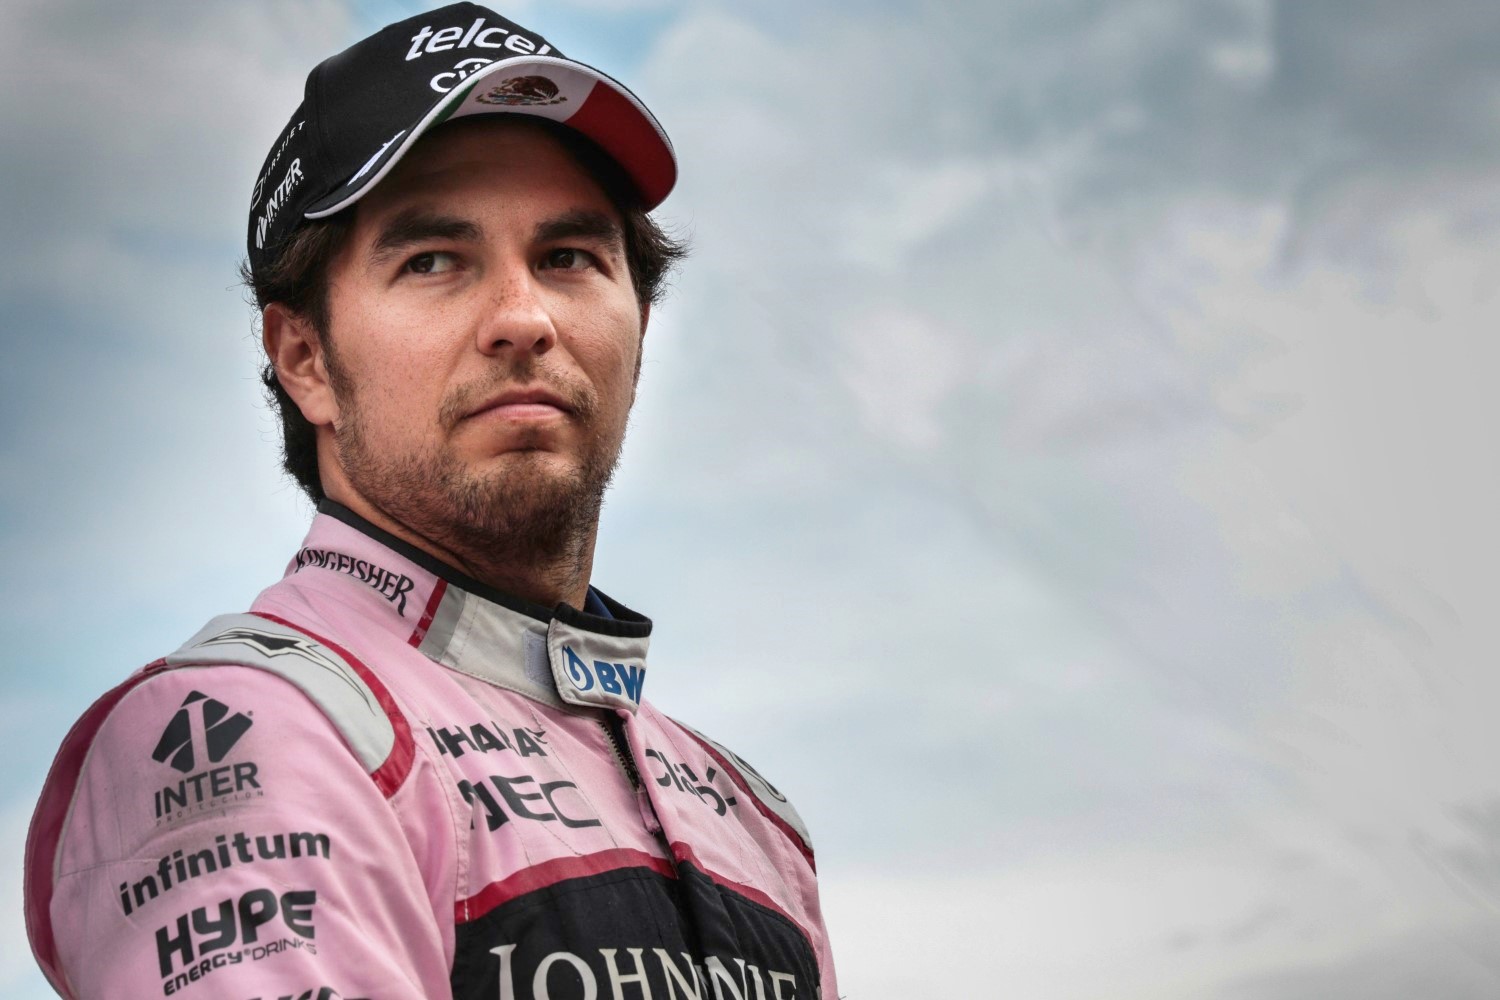 Between his own huge check, plus daddy Stroll buying the team, Perez thinks Racing Point Force India will surprise in 2019